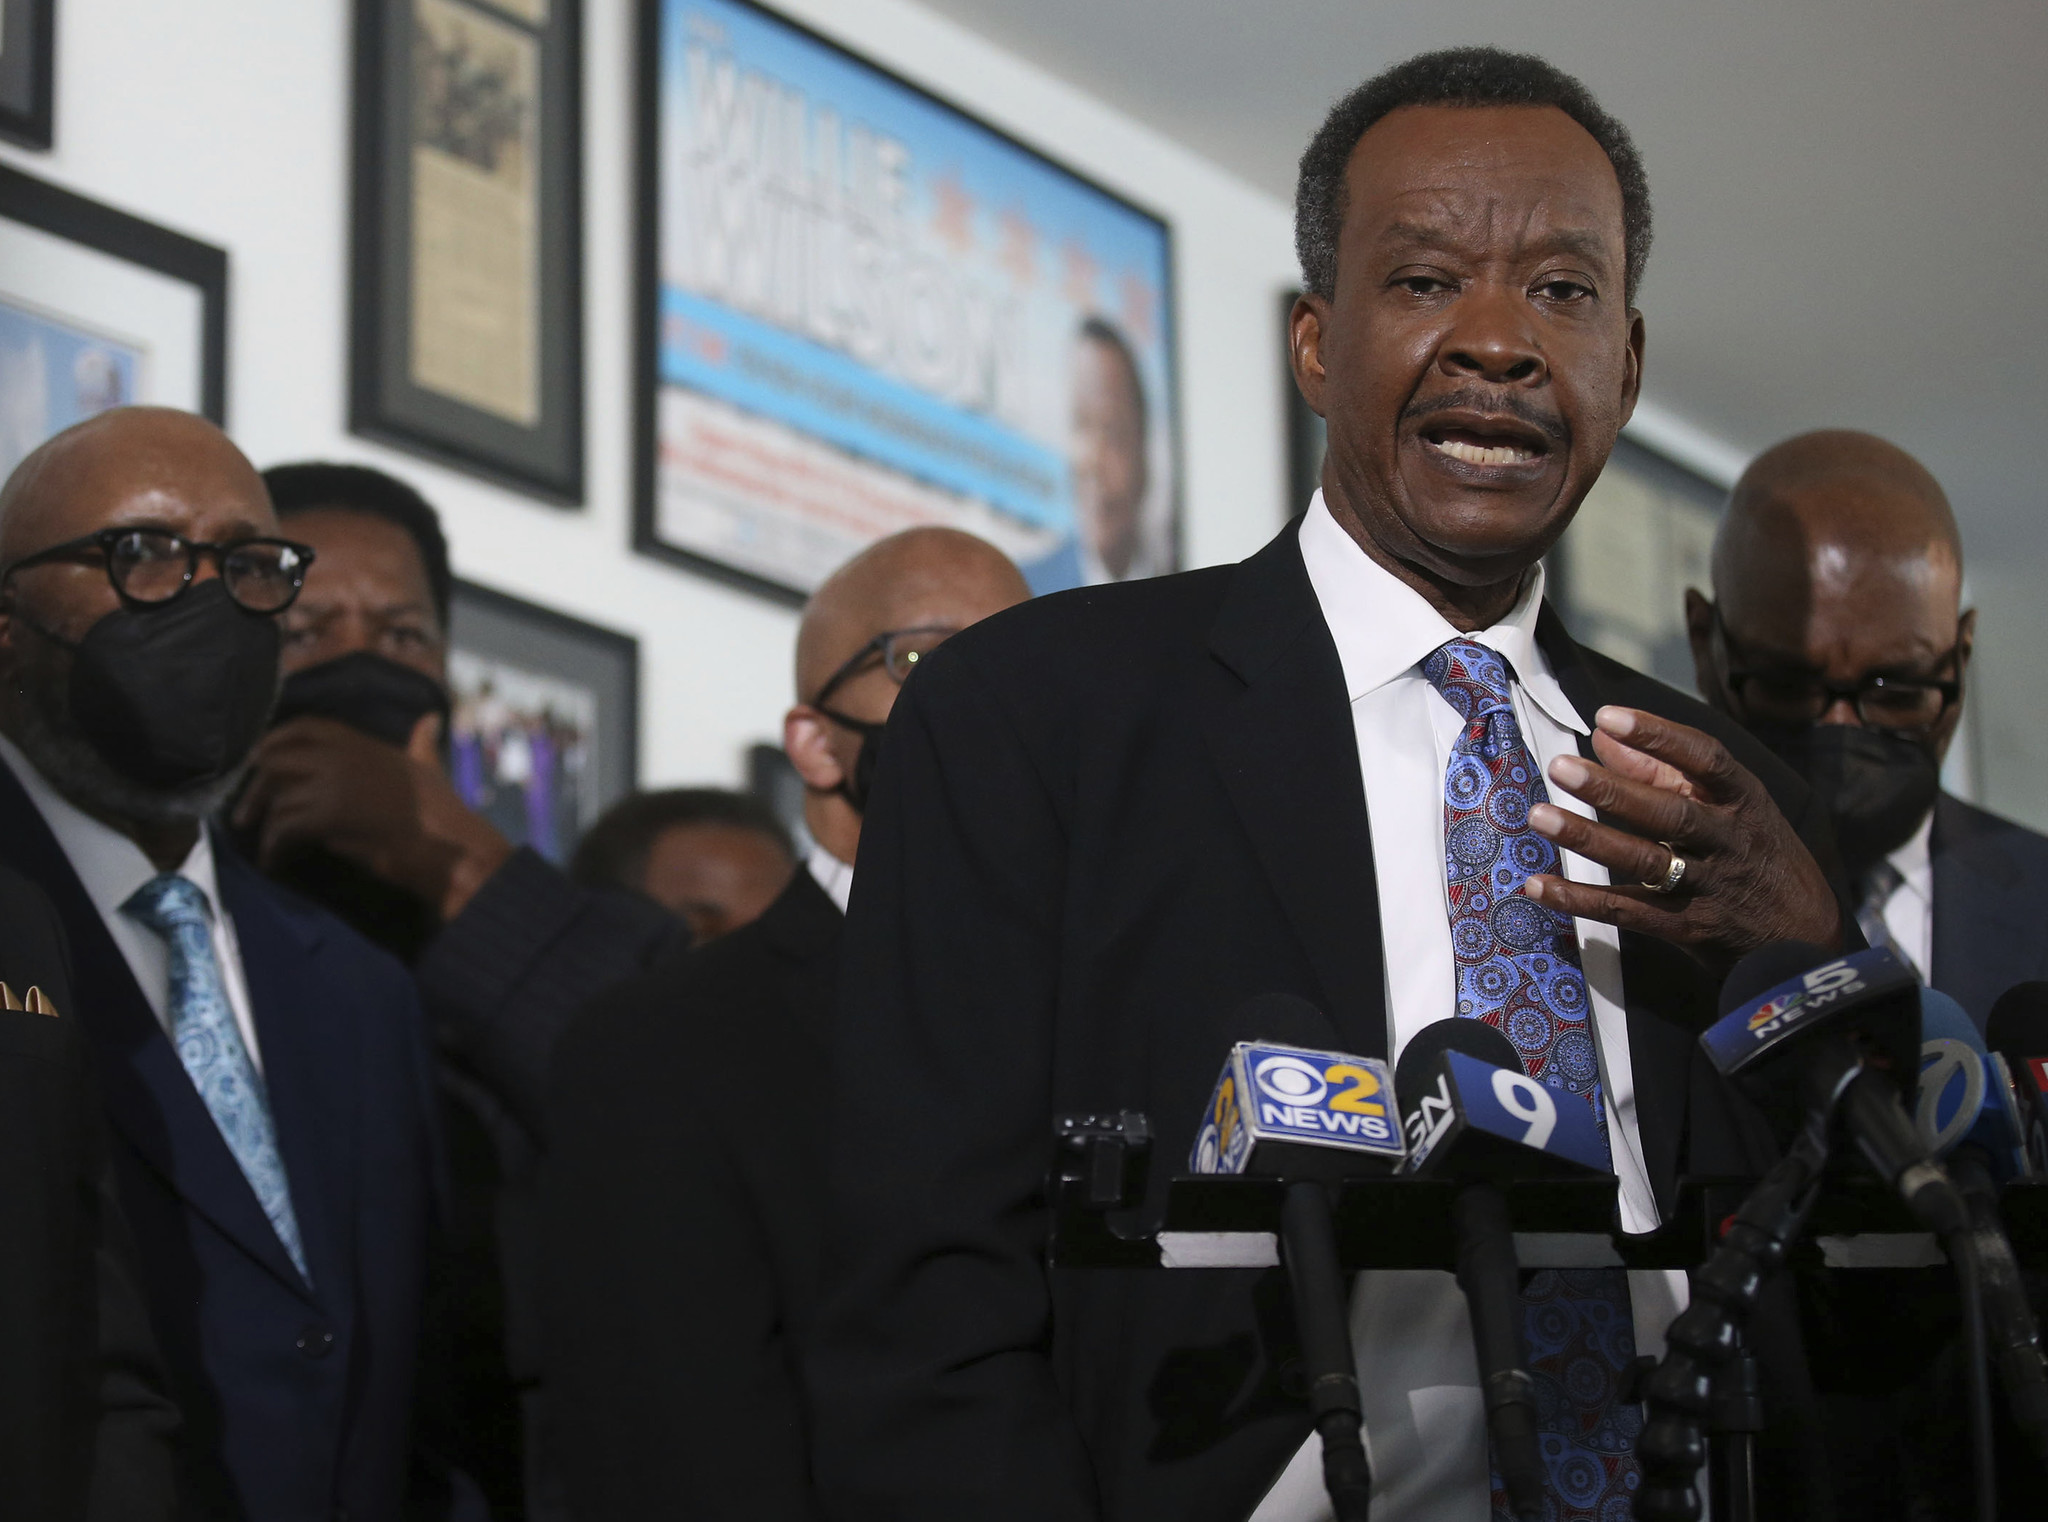 Candidate Willie Wilson to have more giveaways in Chicago